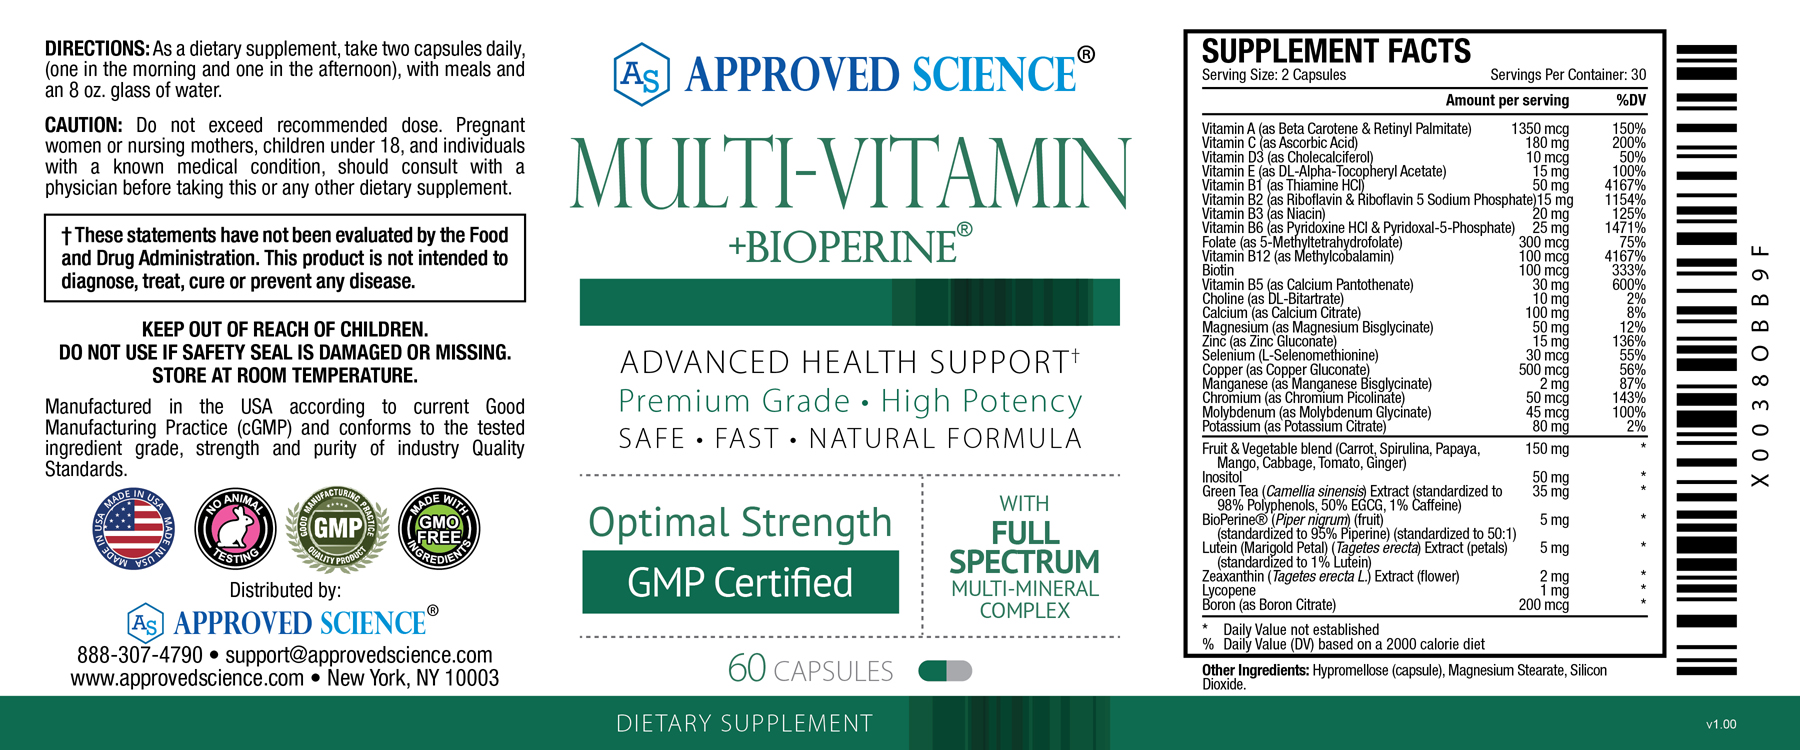 Approved Science® Multi-Vitamin Supplement Facts